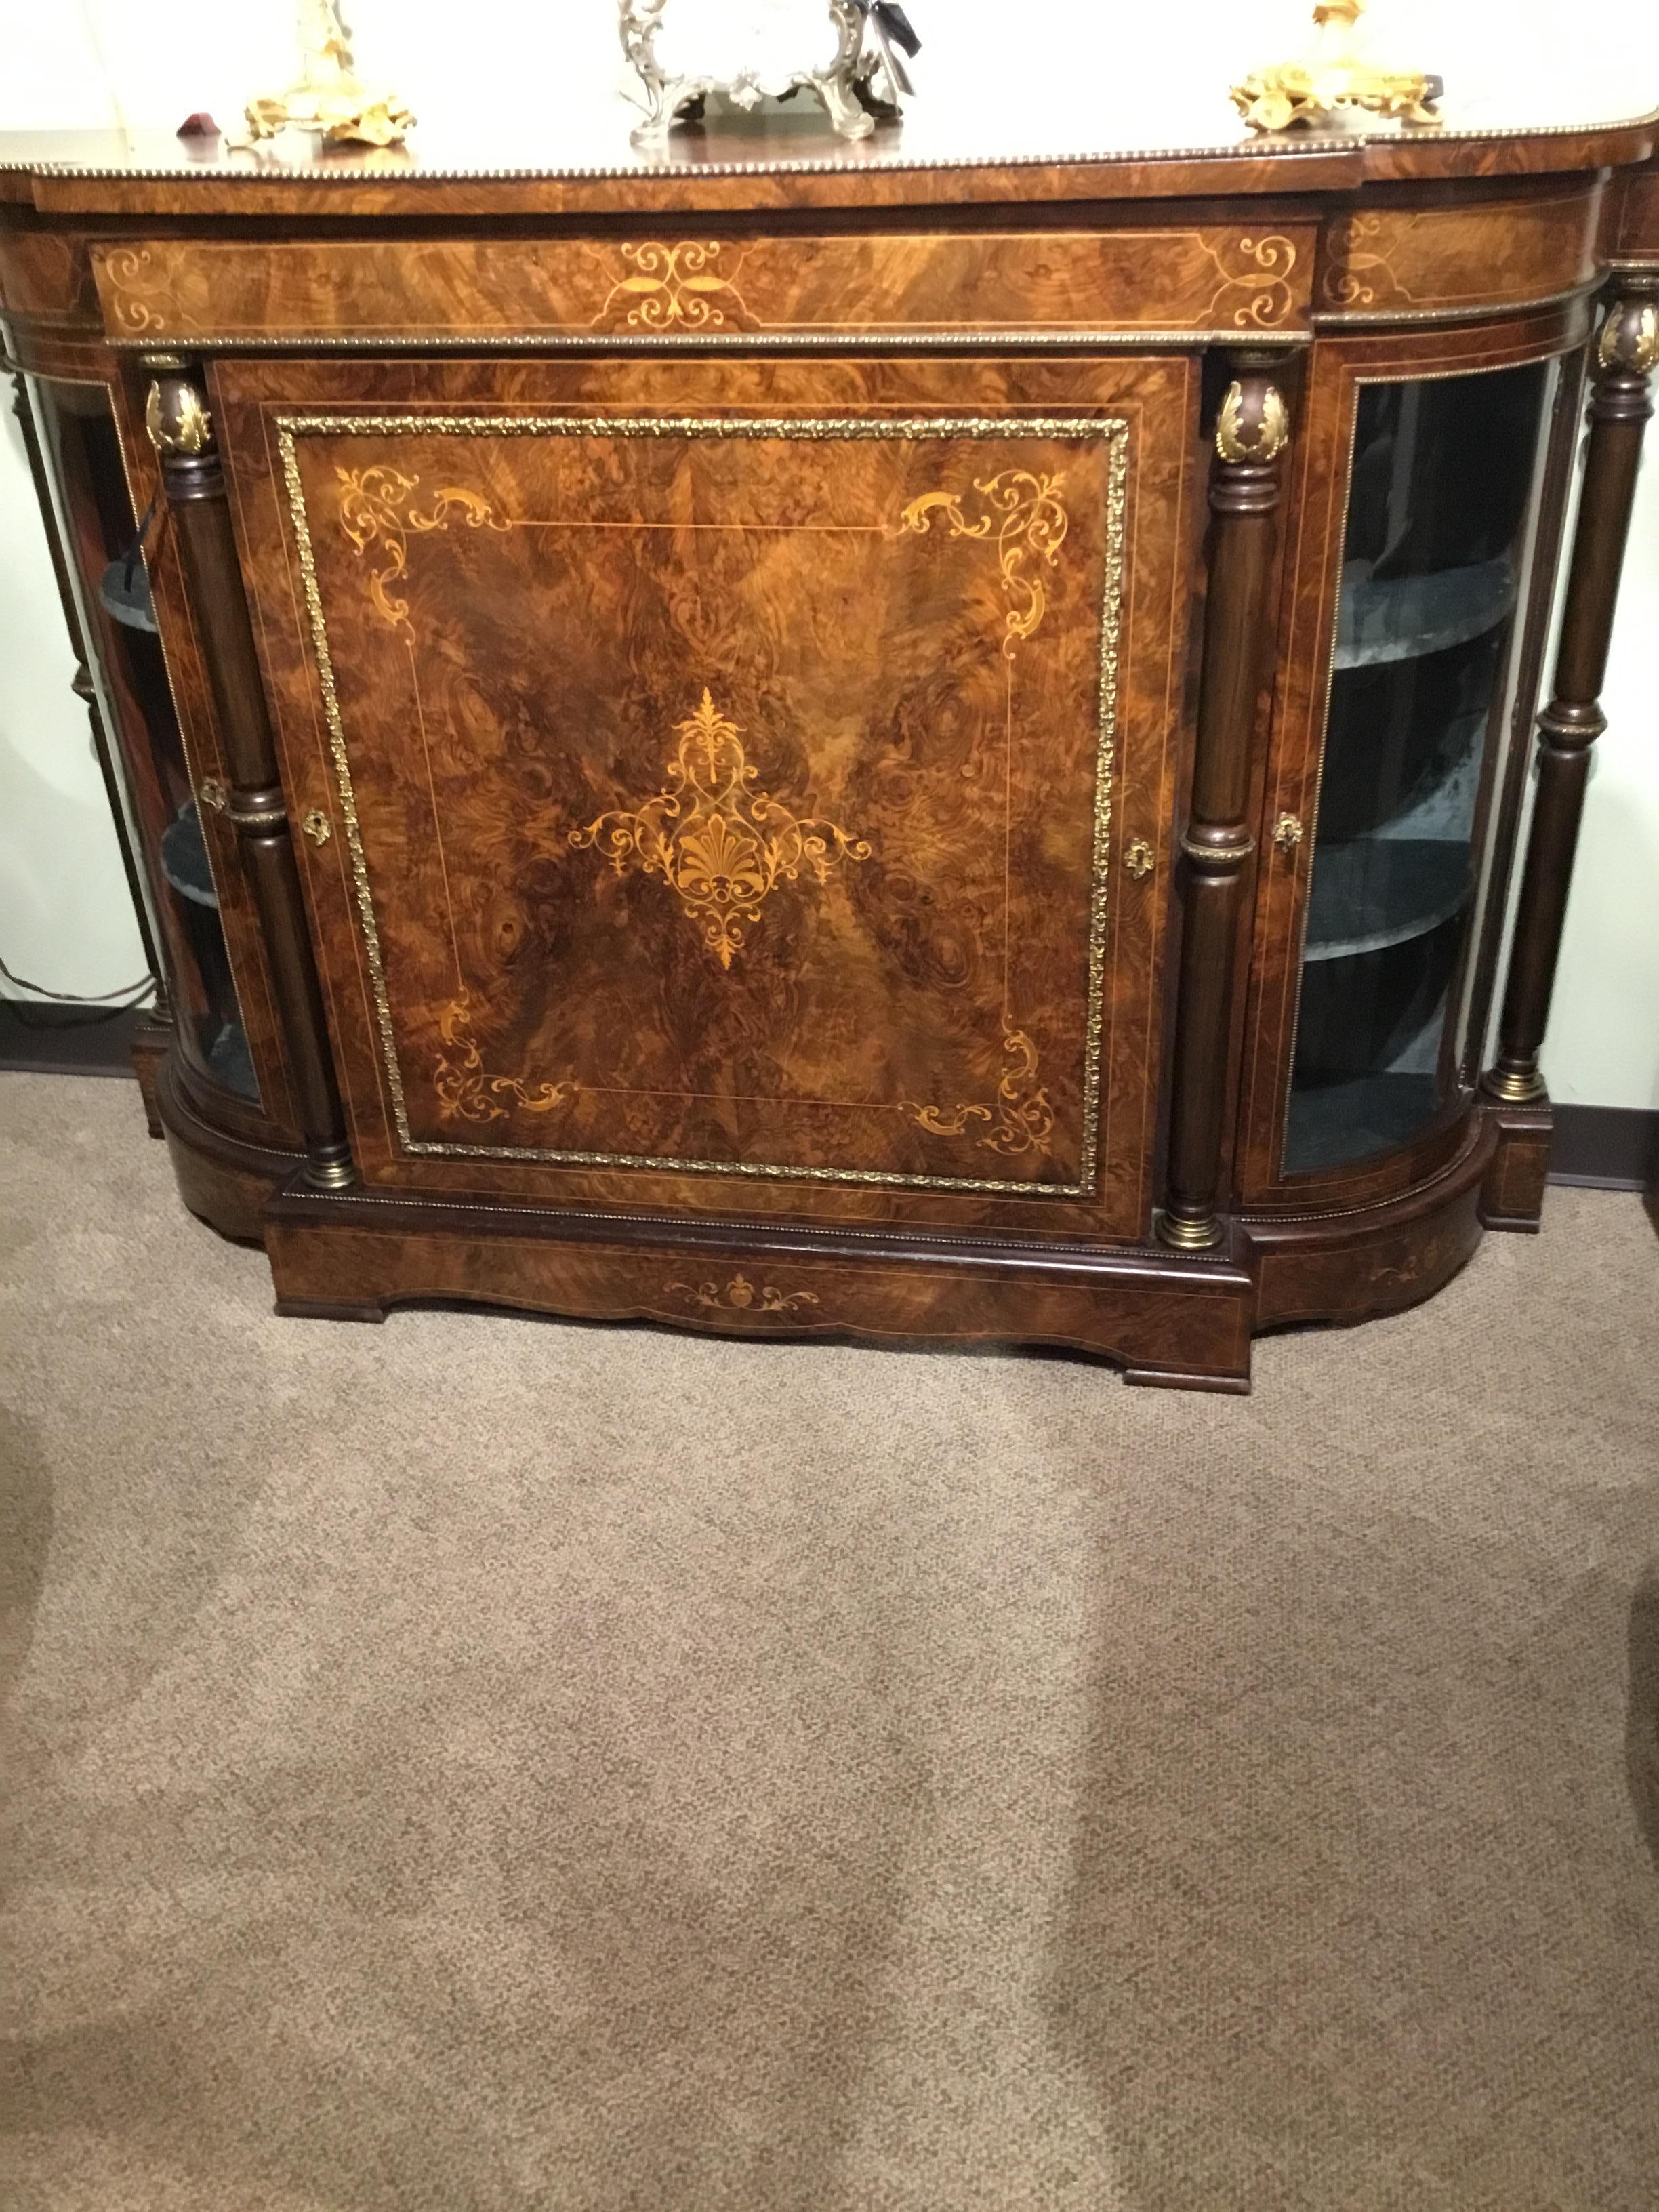 Edwardian Style Antique Cabinet, 19th Century Burled Walnut with Marquetry 2